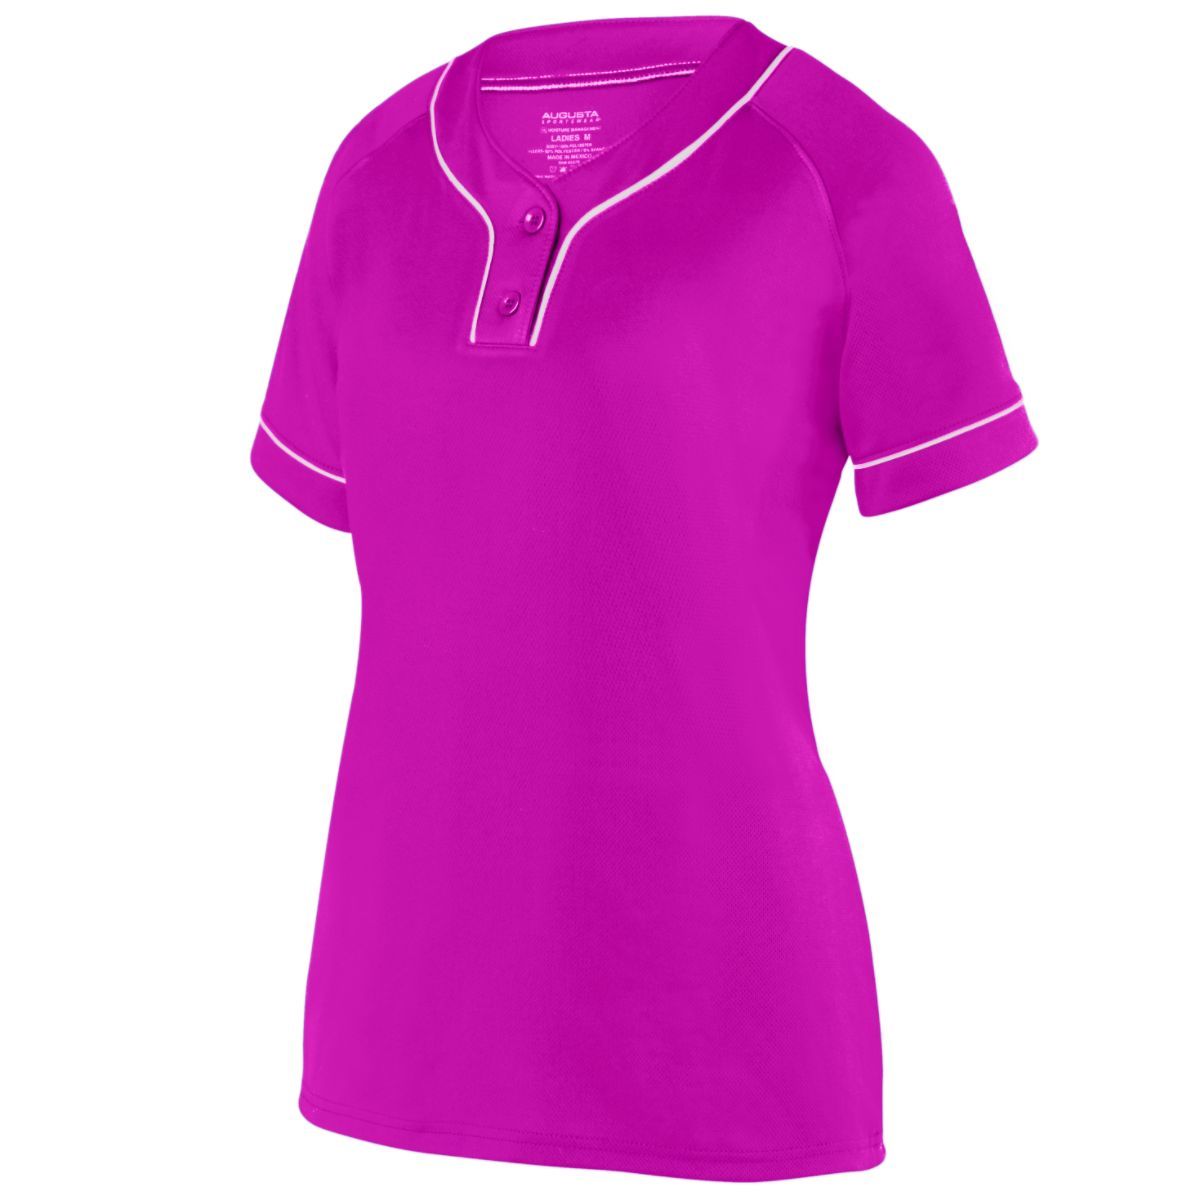 Augusta Sportswear Girls Overpower Two-Button Jersey in Power Pink/White  -Part of the Girls, Augusta-Products, Softball, Girls-Jersey, Shirts product lines at KanaleyCreations.com